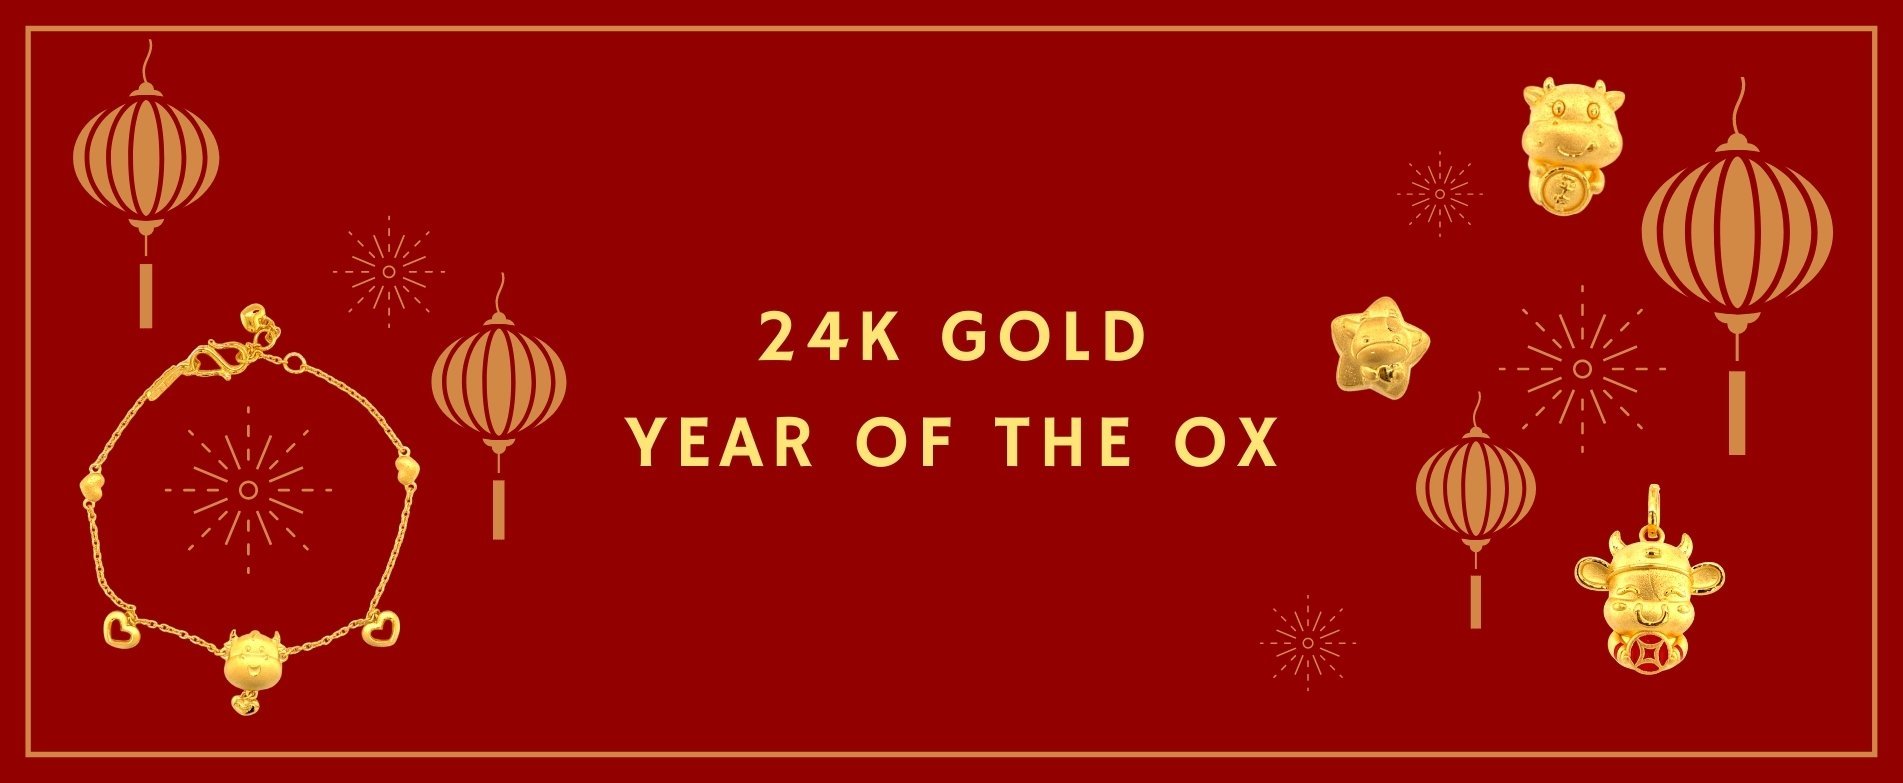 24K Gold Year of the Ox